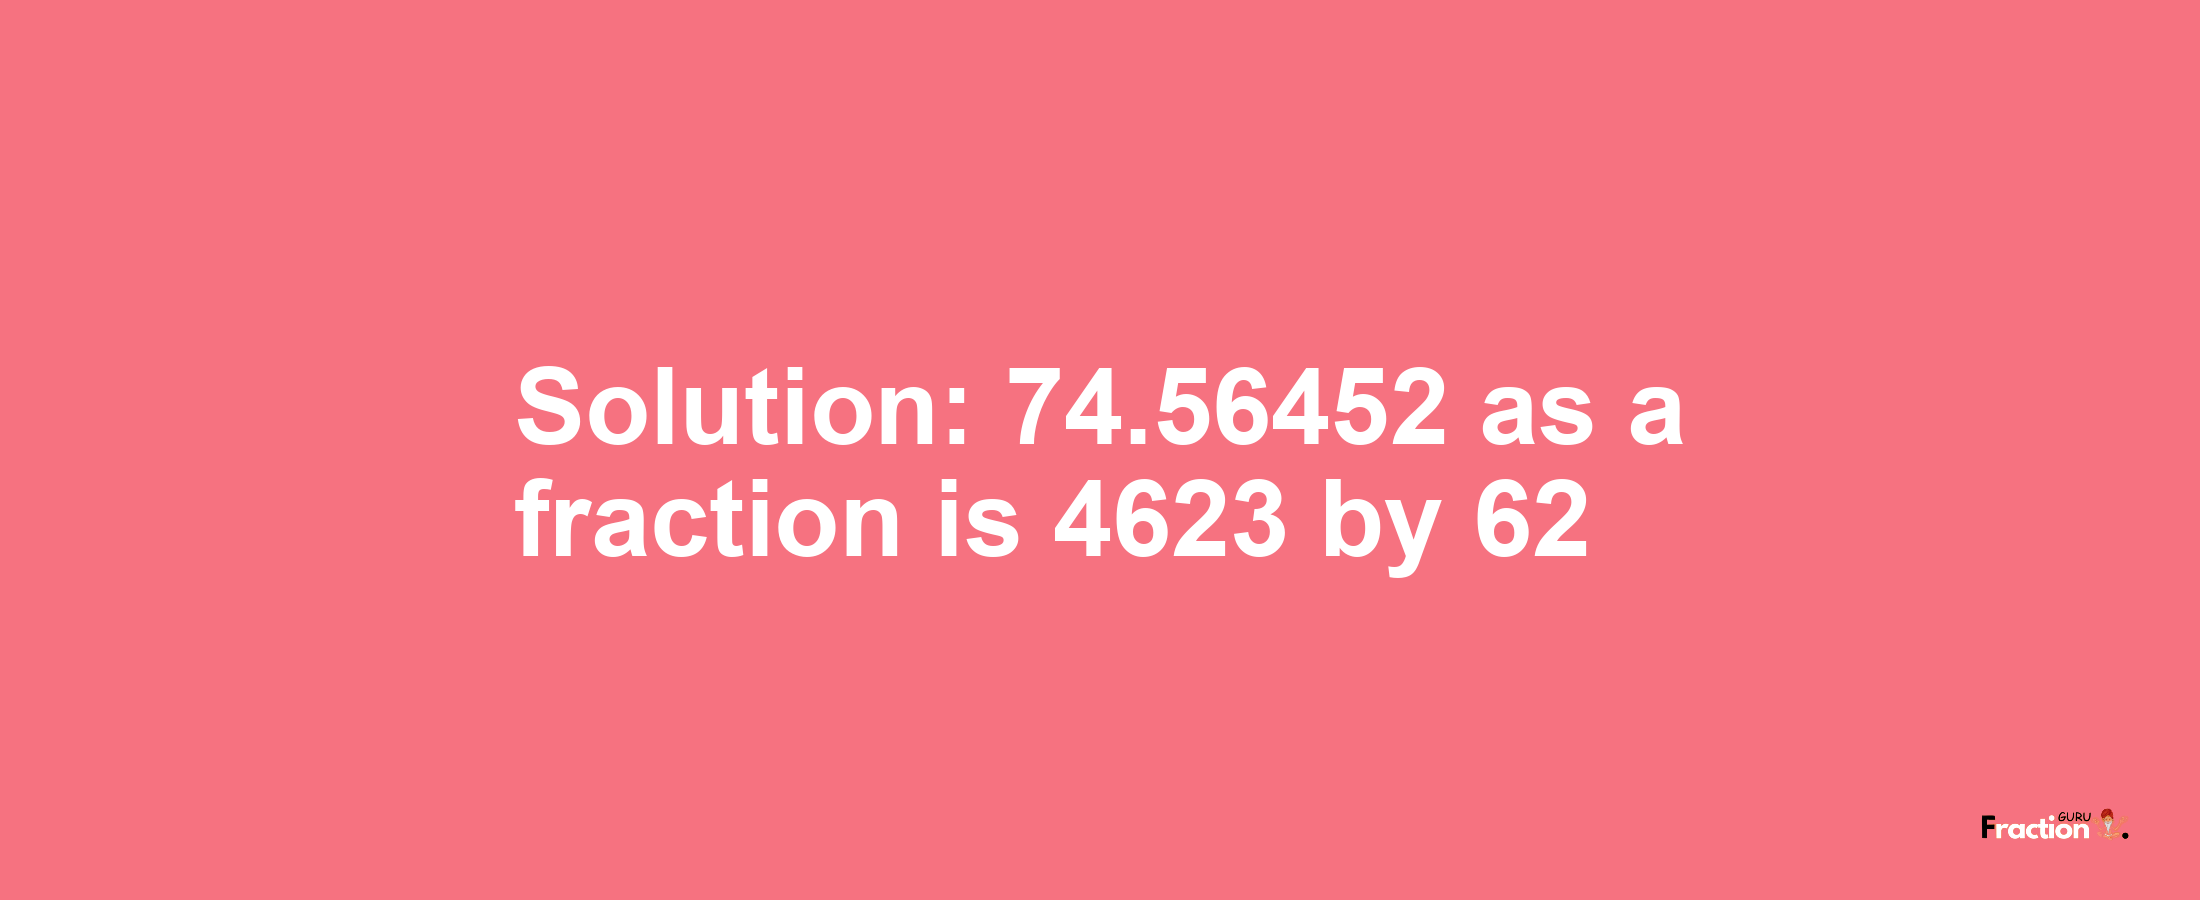 Solution:74.56452 as a fraction is 4623/62